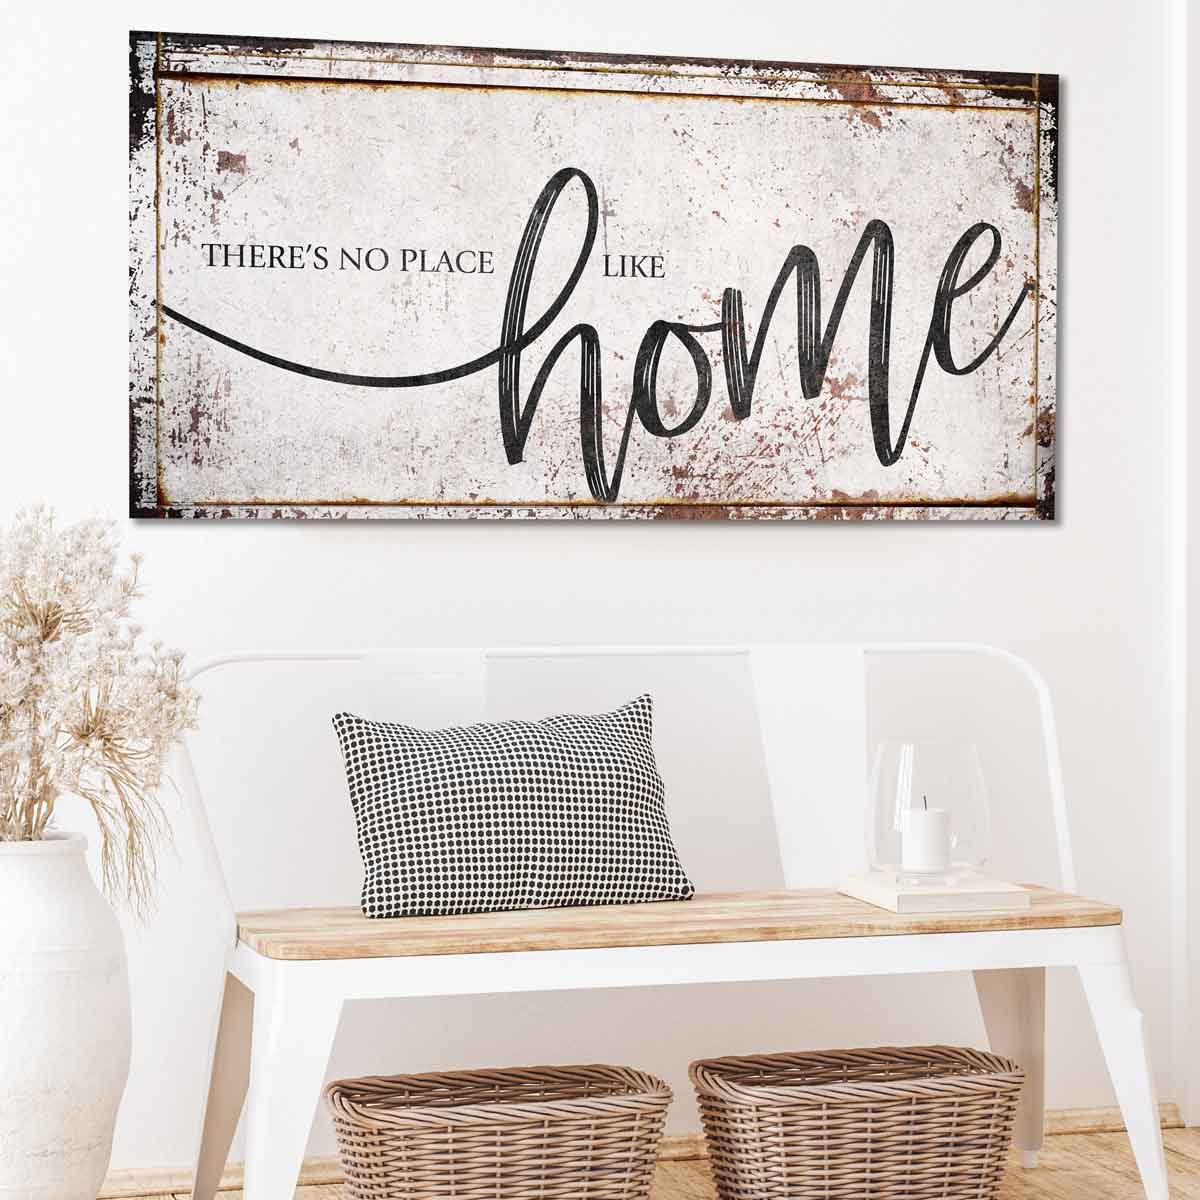 Modern farmhouse wall decor of distressed wood and the words: There's no place like Home